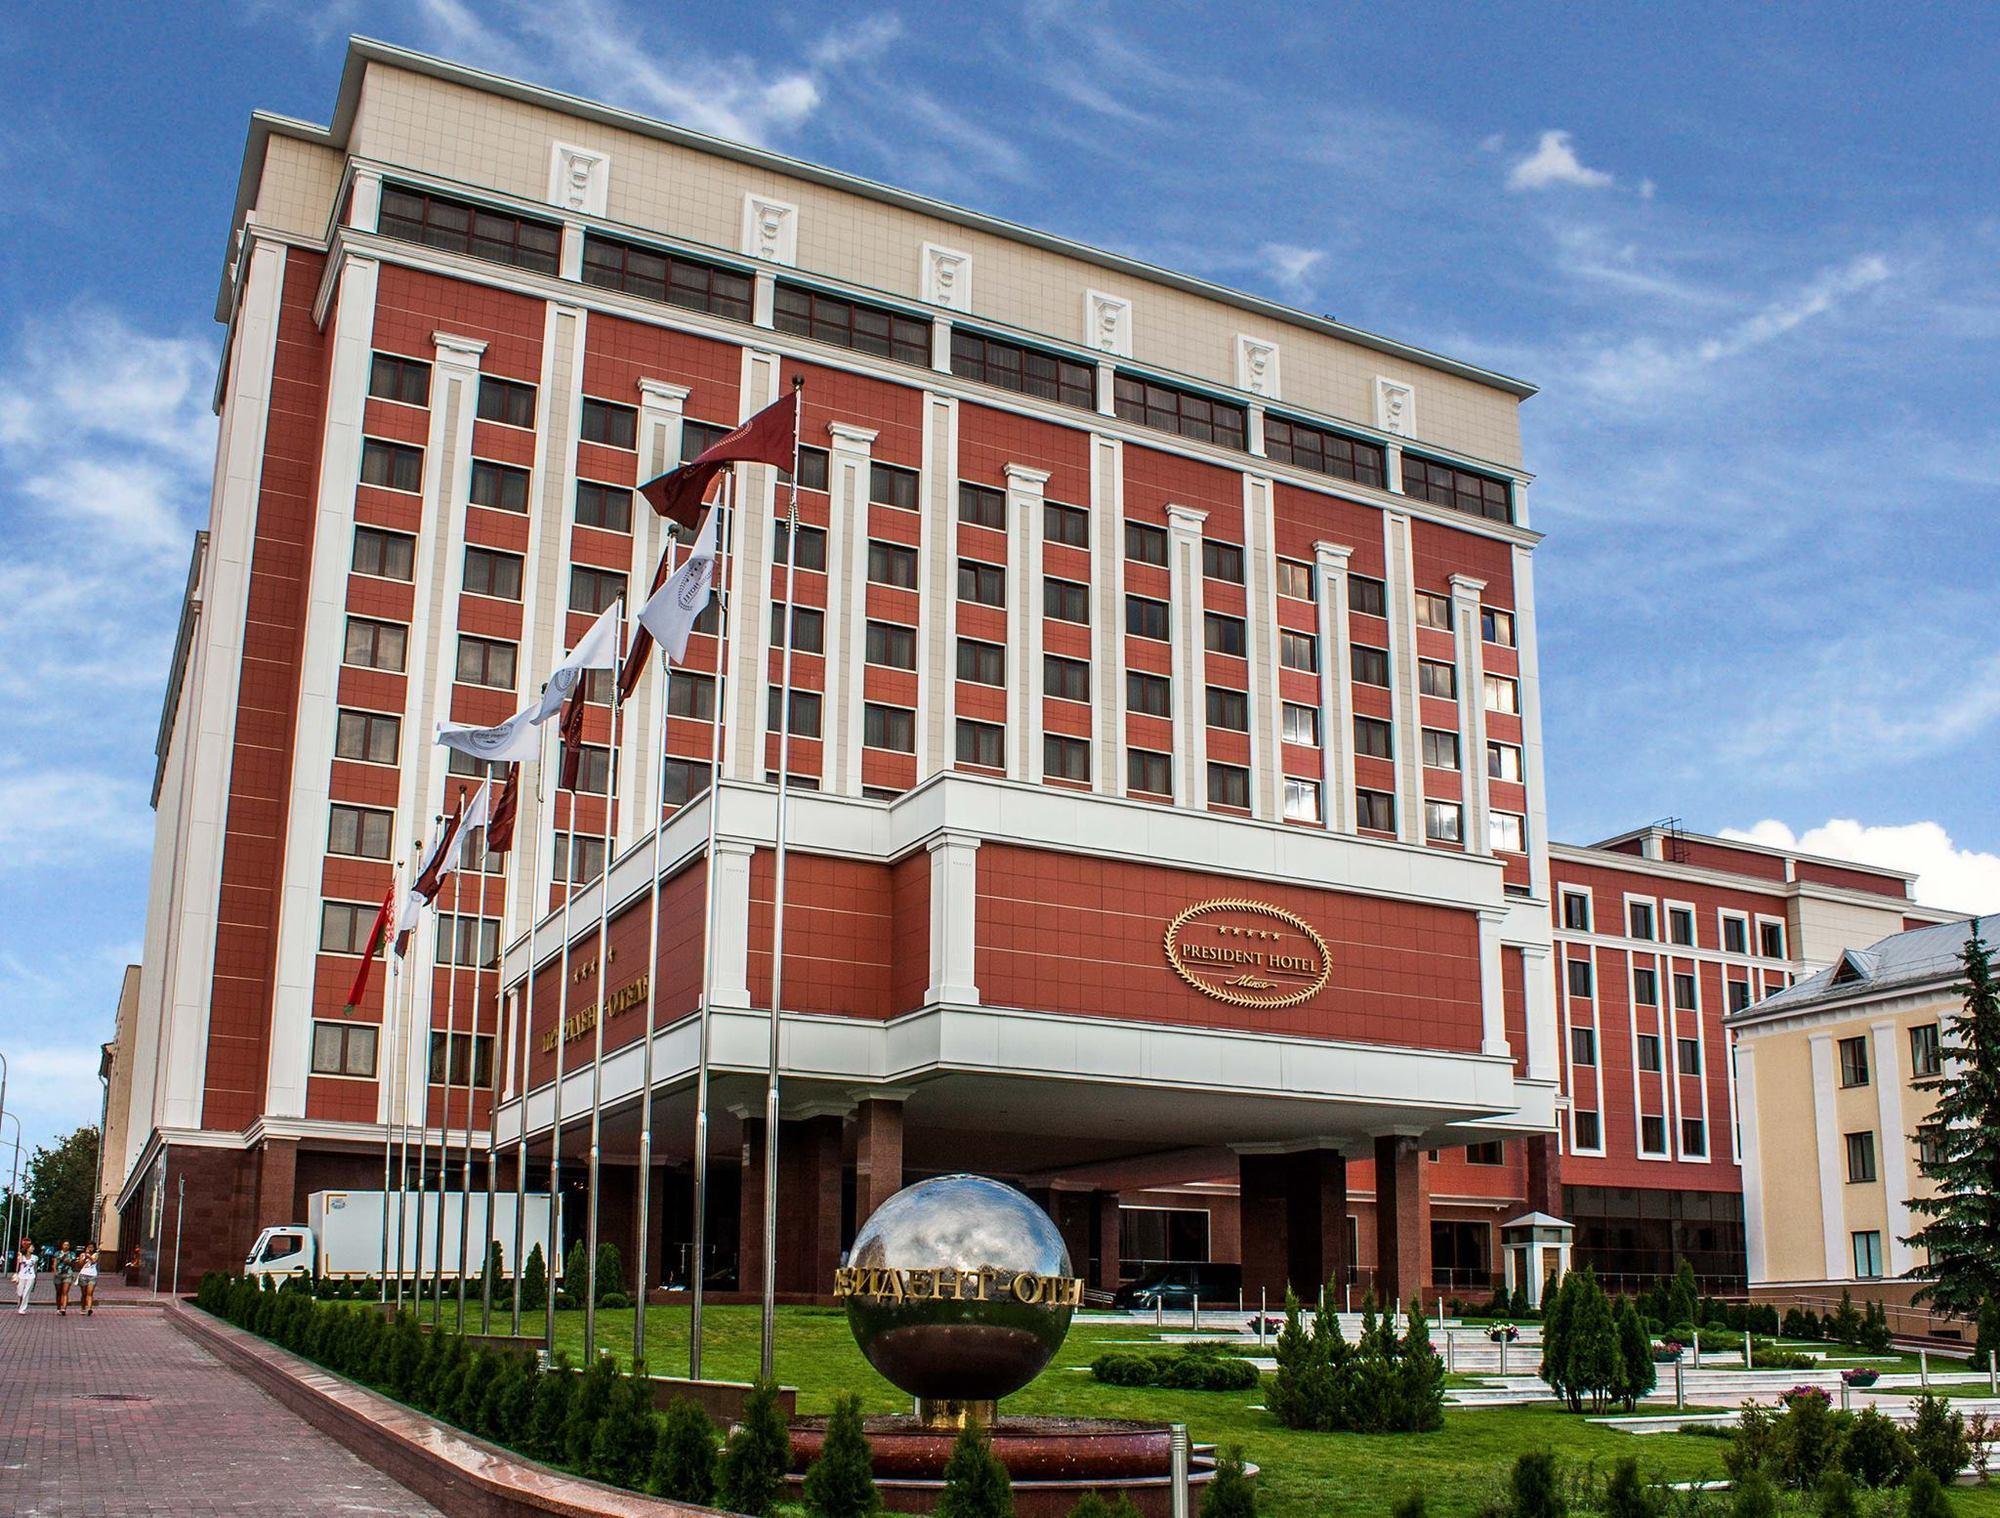 President Hotel Minsk wallpaper and image, picture